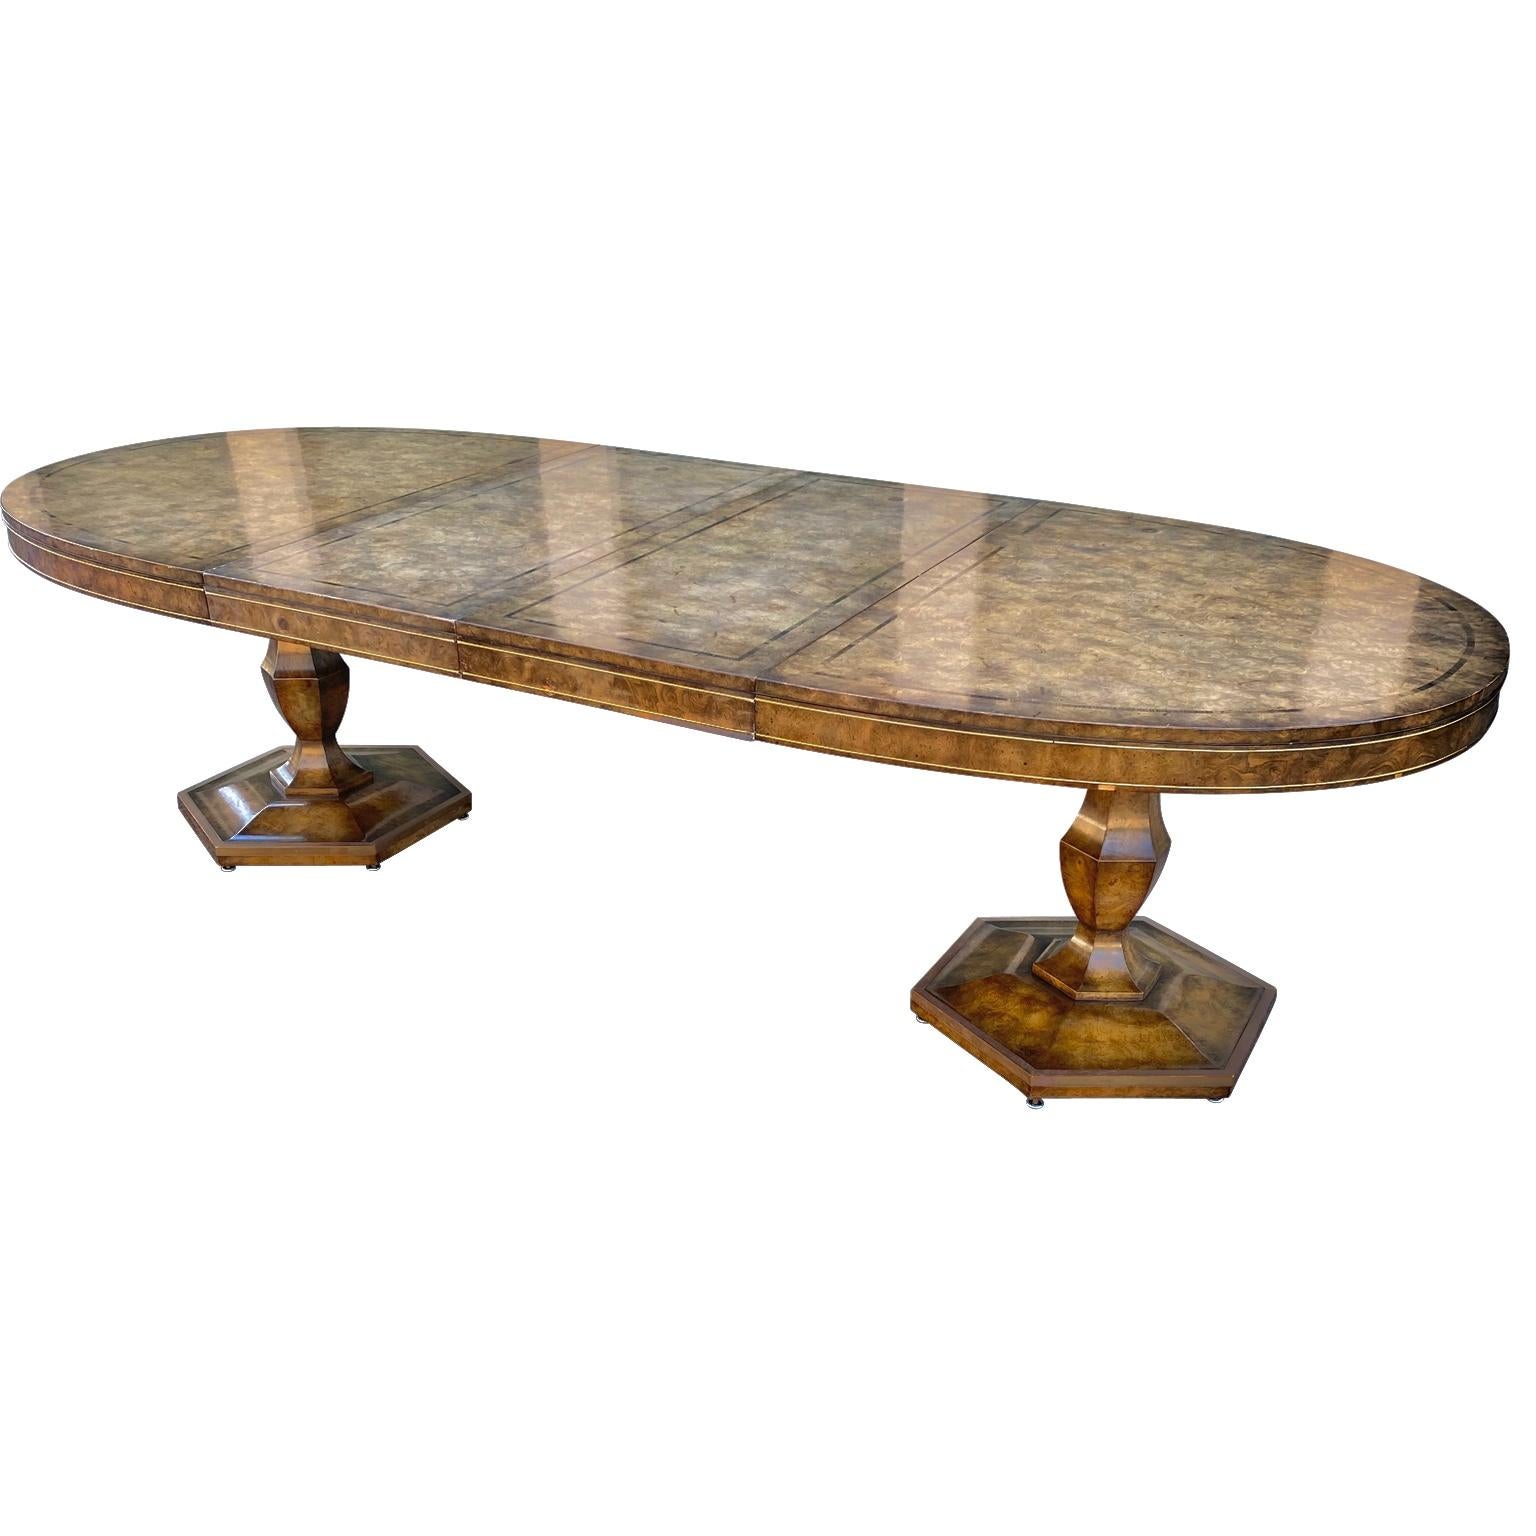 Large oval double pedestal burl and elm dining room table on with two original extension leaves. 
Each leaf measures 20 inches wide, bringing the total width/length to 110 inches (9 feet and 2 inches).

  